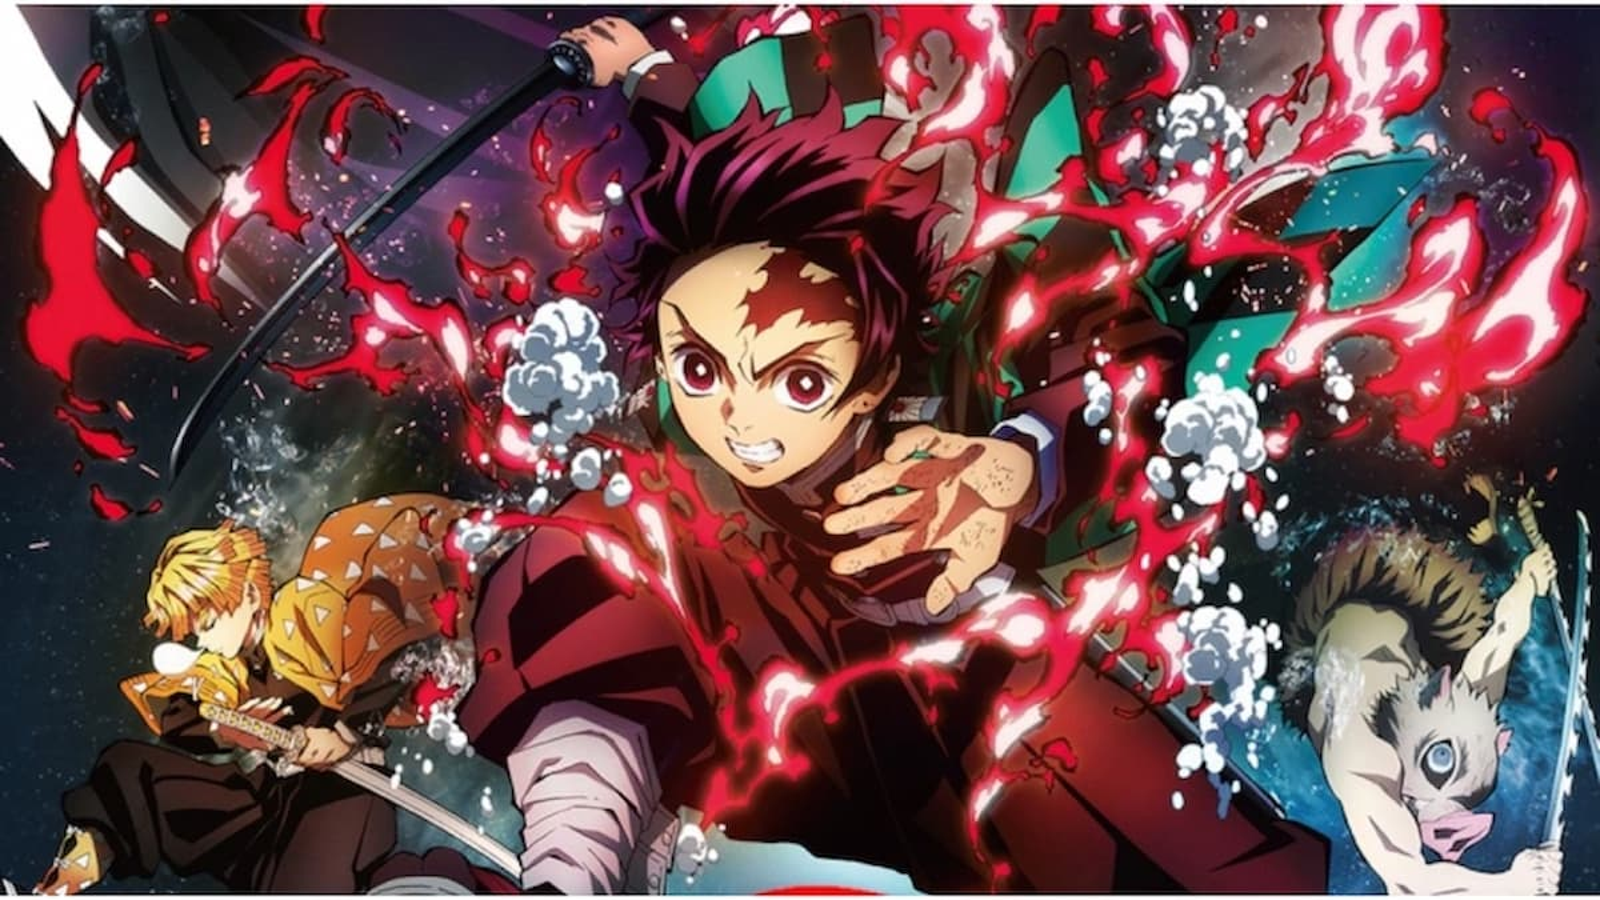 Demon Slayer Season 2 Release Date, Cast, Plot and Other Details